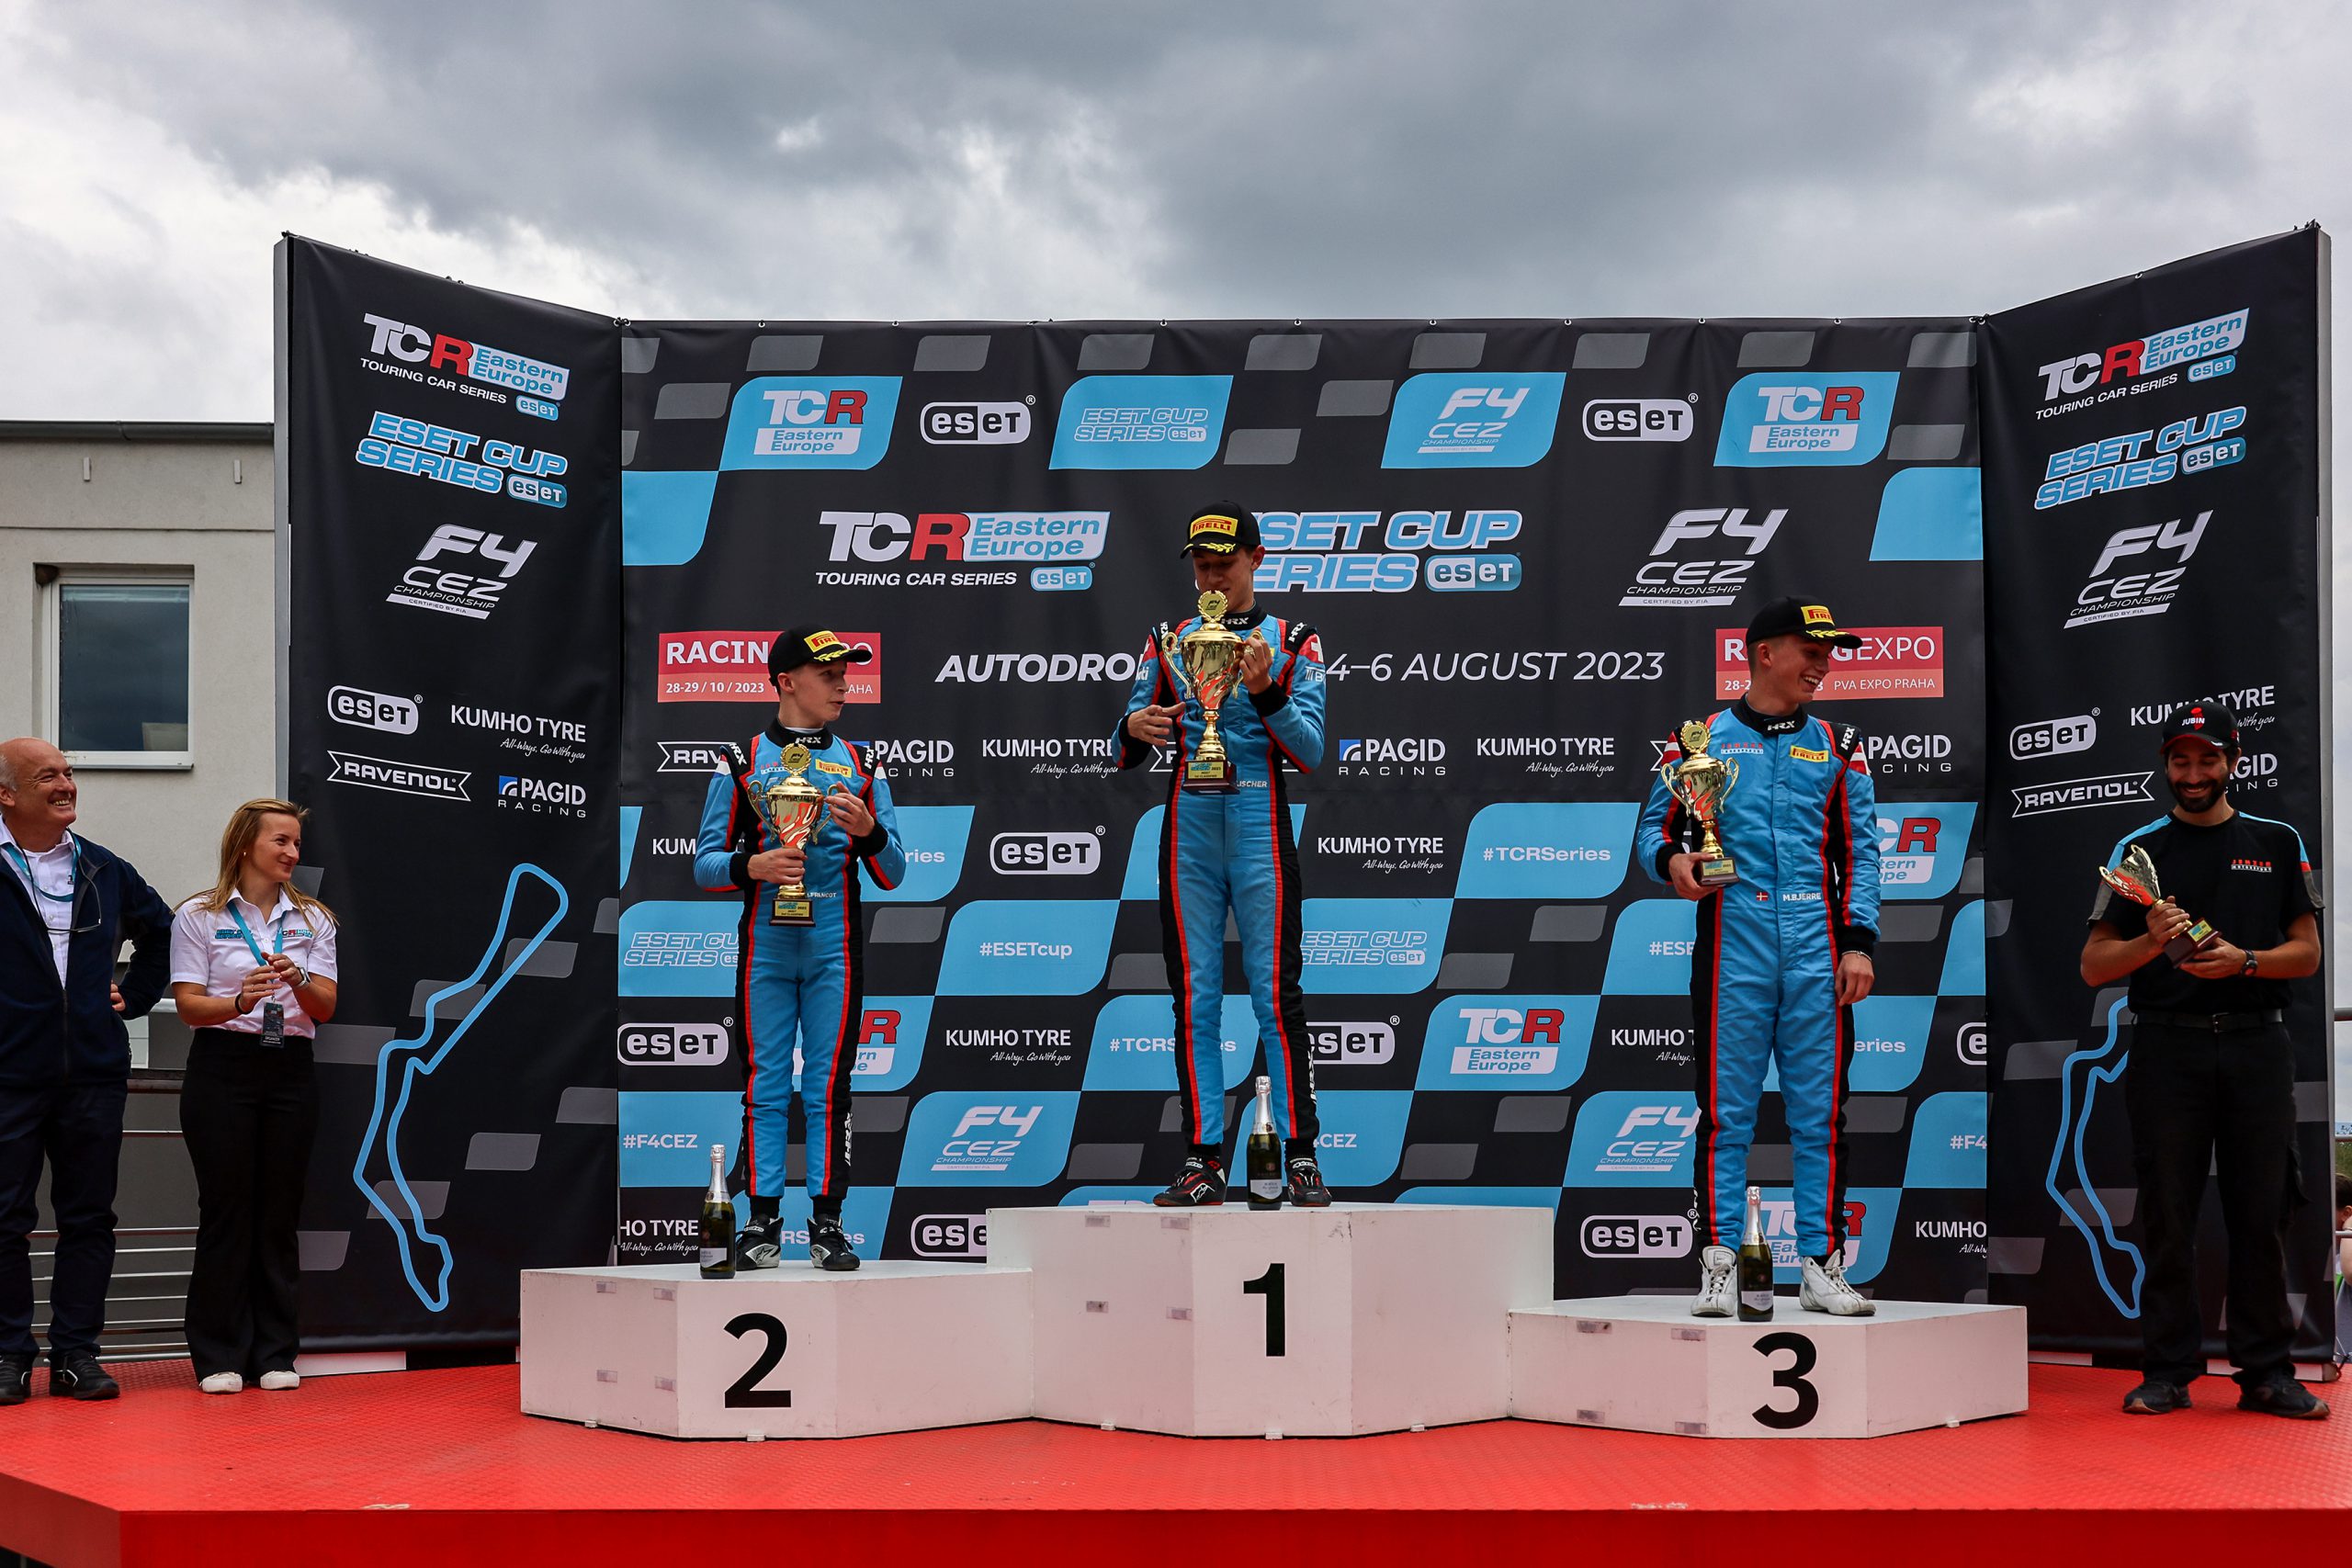 Ethan Ischer led the Jenzer Motorsport team to a 1-2-3 finish